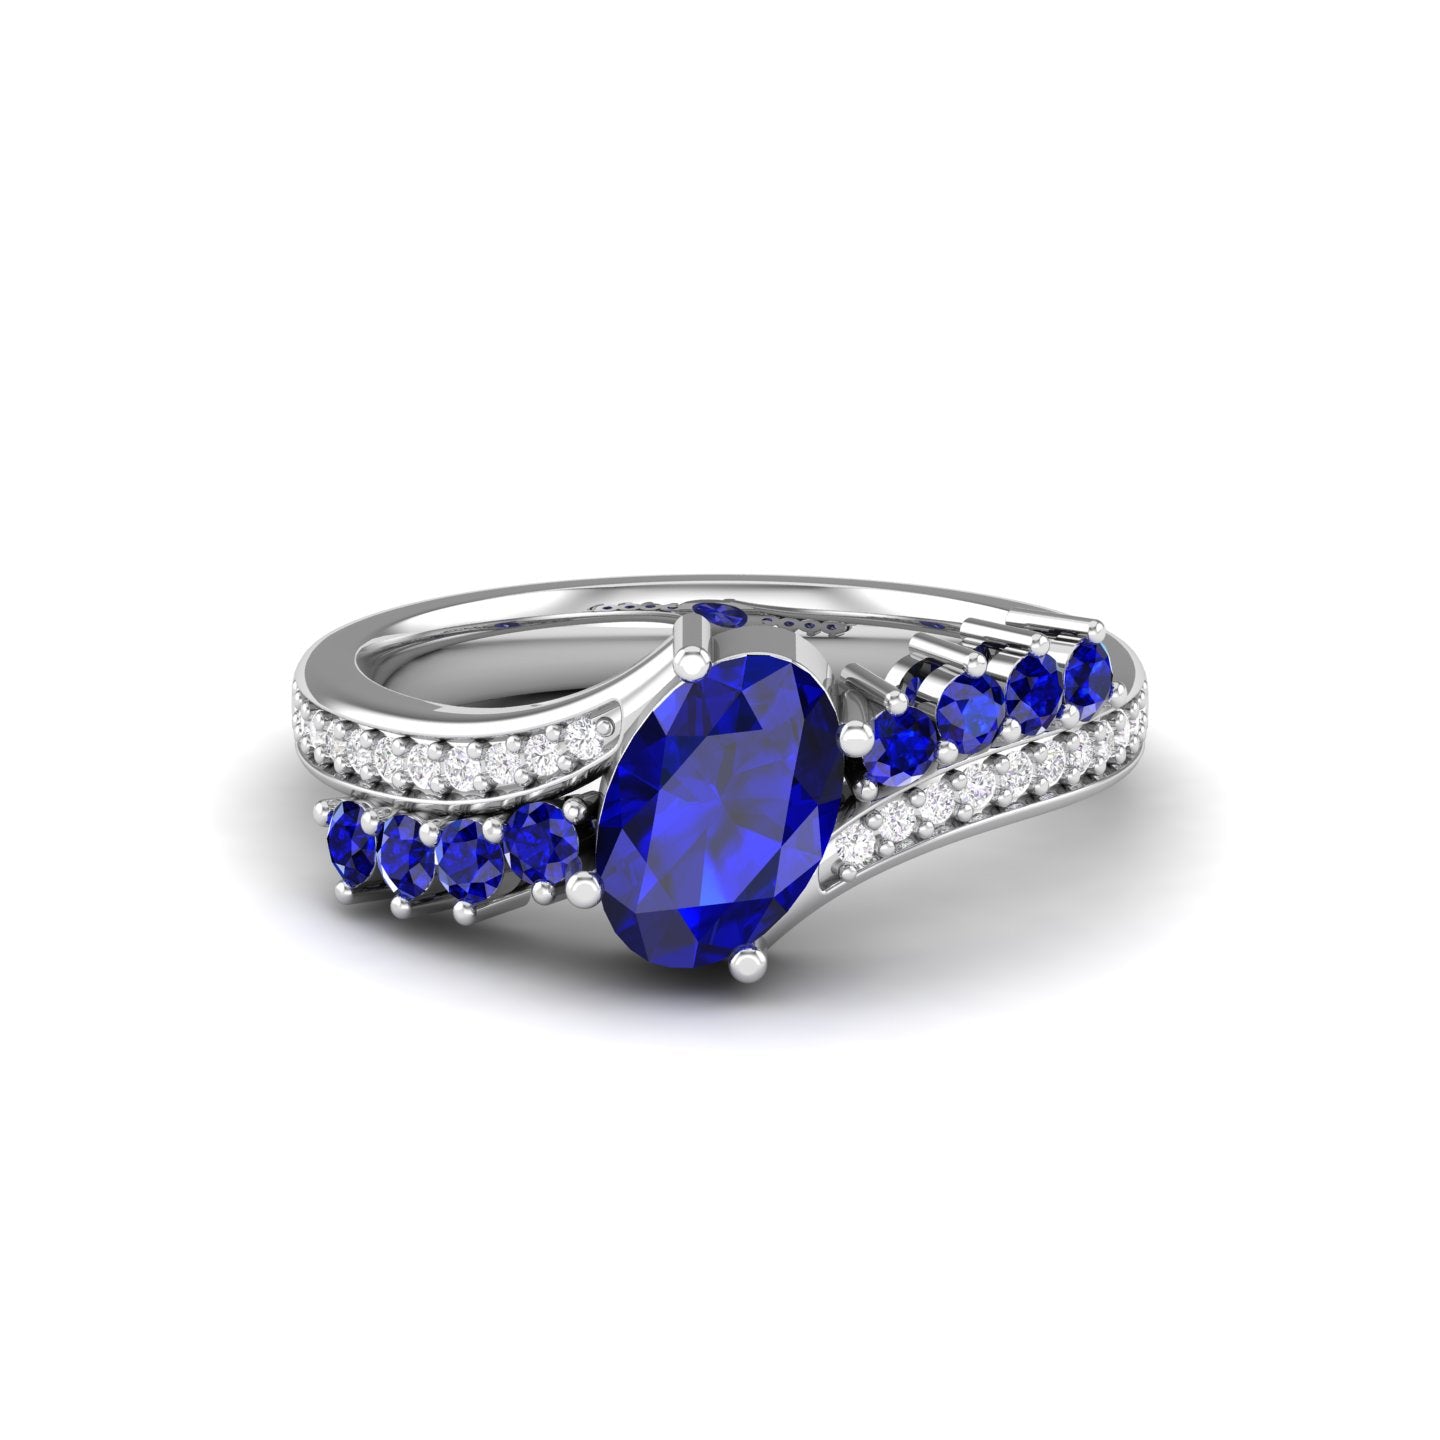 Maurya Solitaire Oval Blue Sapphire Color Splash Engagement Ring